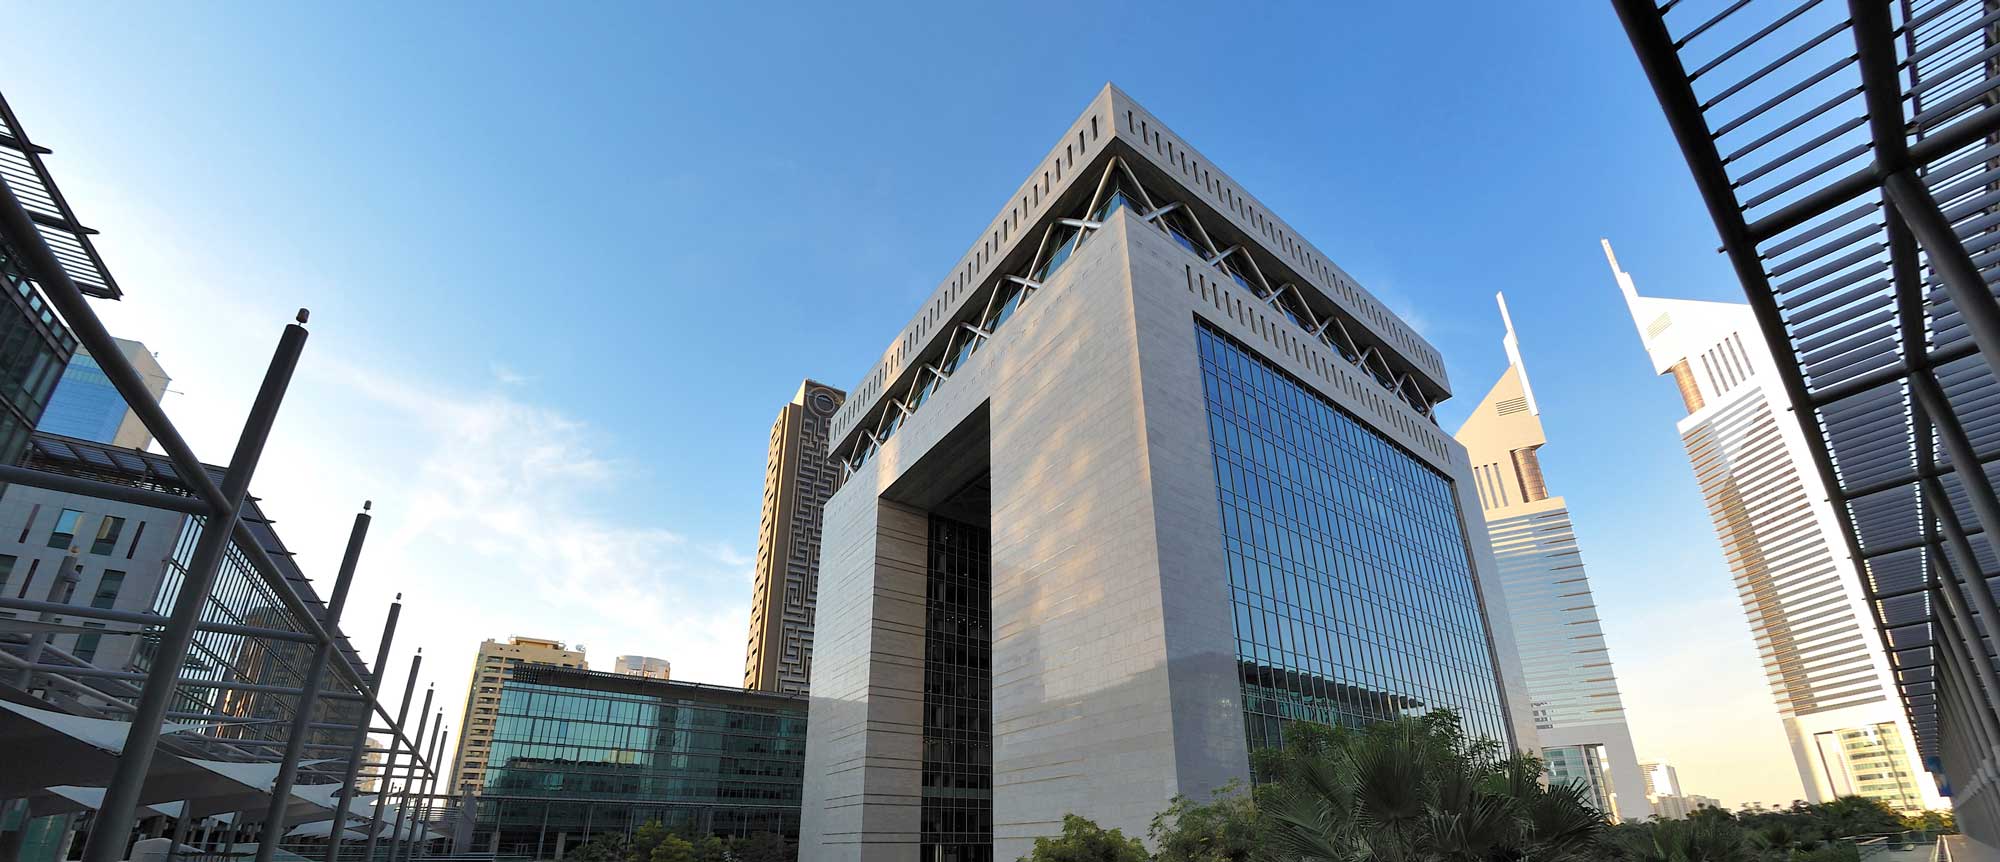 Capital Investment Fund Abu Dhabi portfolio in Saudi Arabia to receive a merchant acquiring license from the Saudi Central Bank